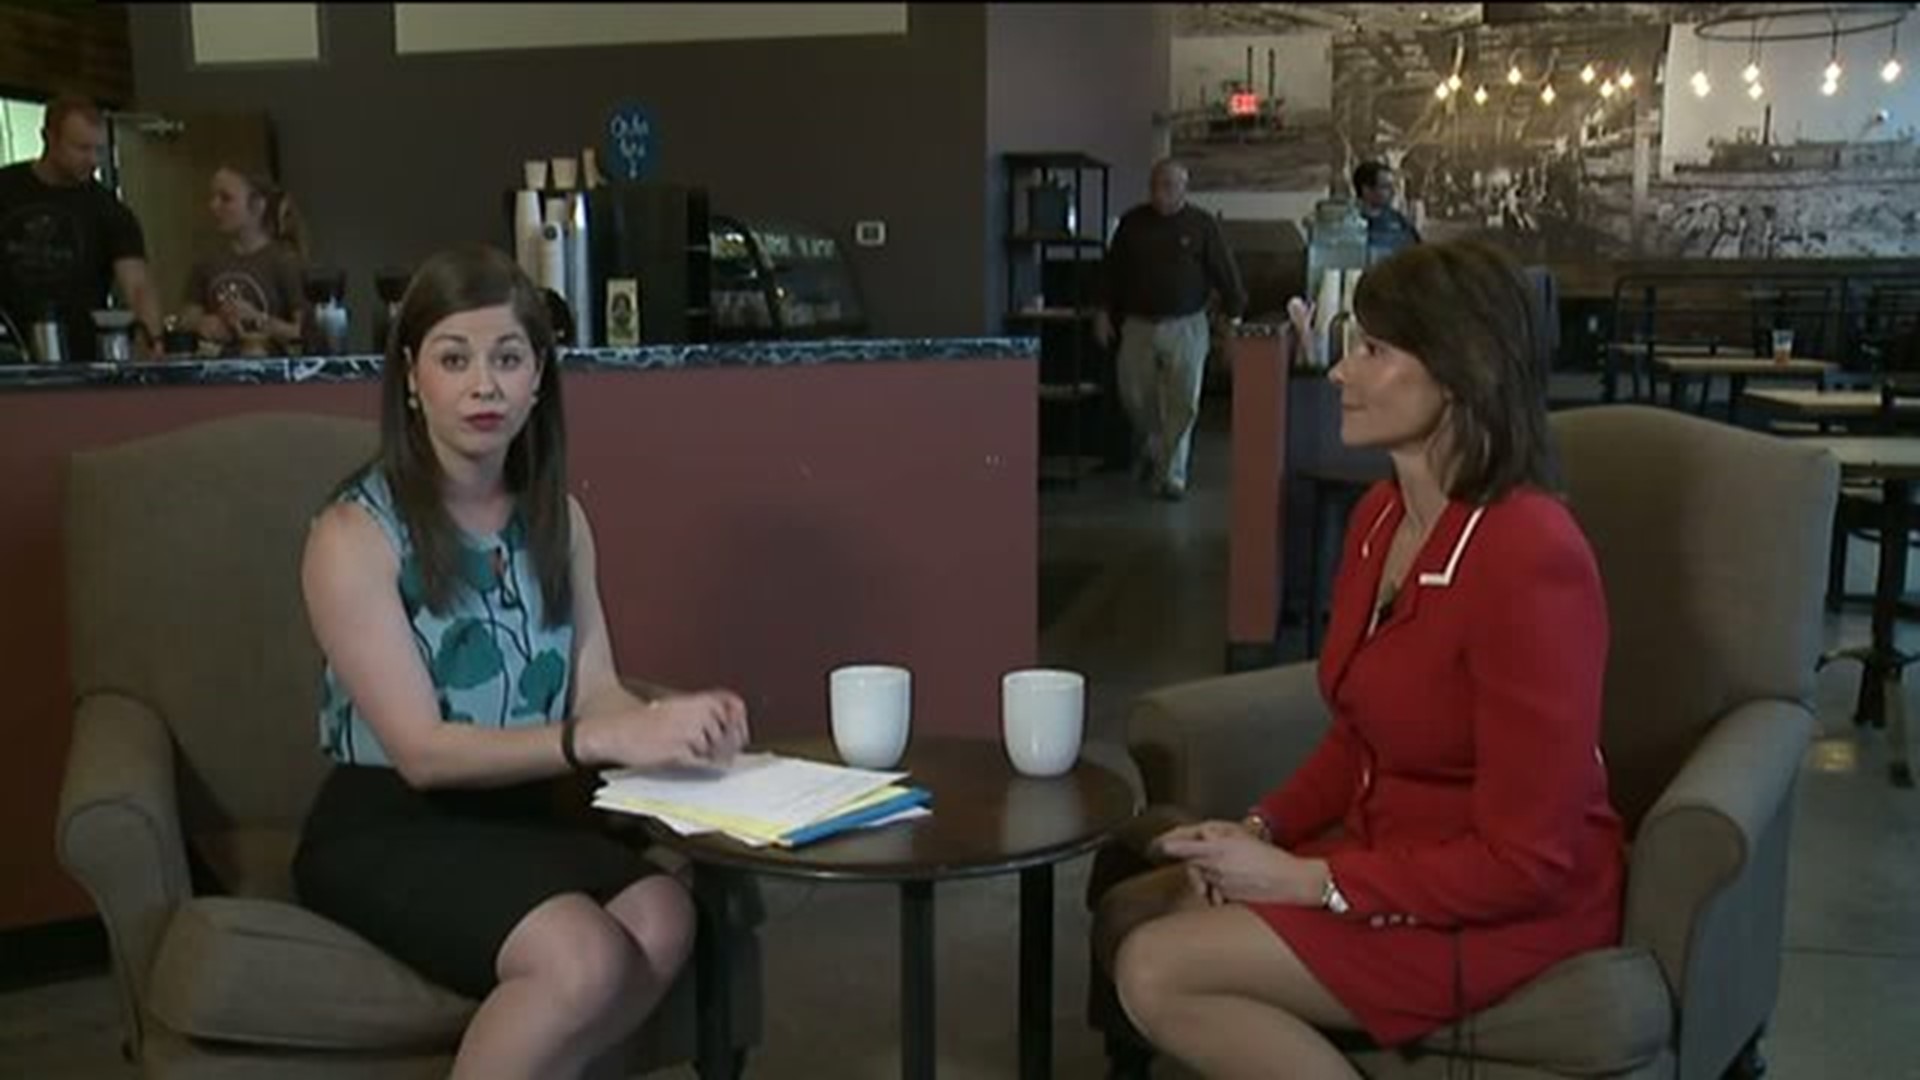 Cheri Bustos Explains What She Does Outside of Work